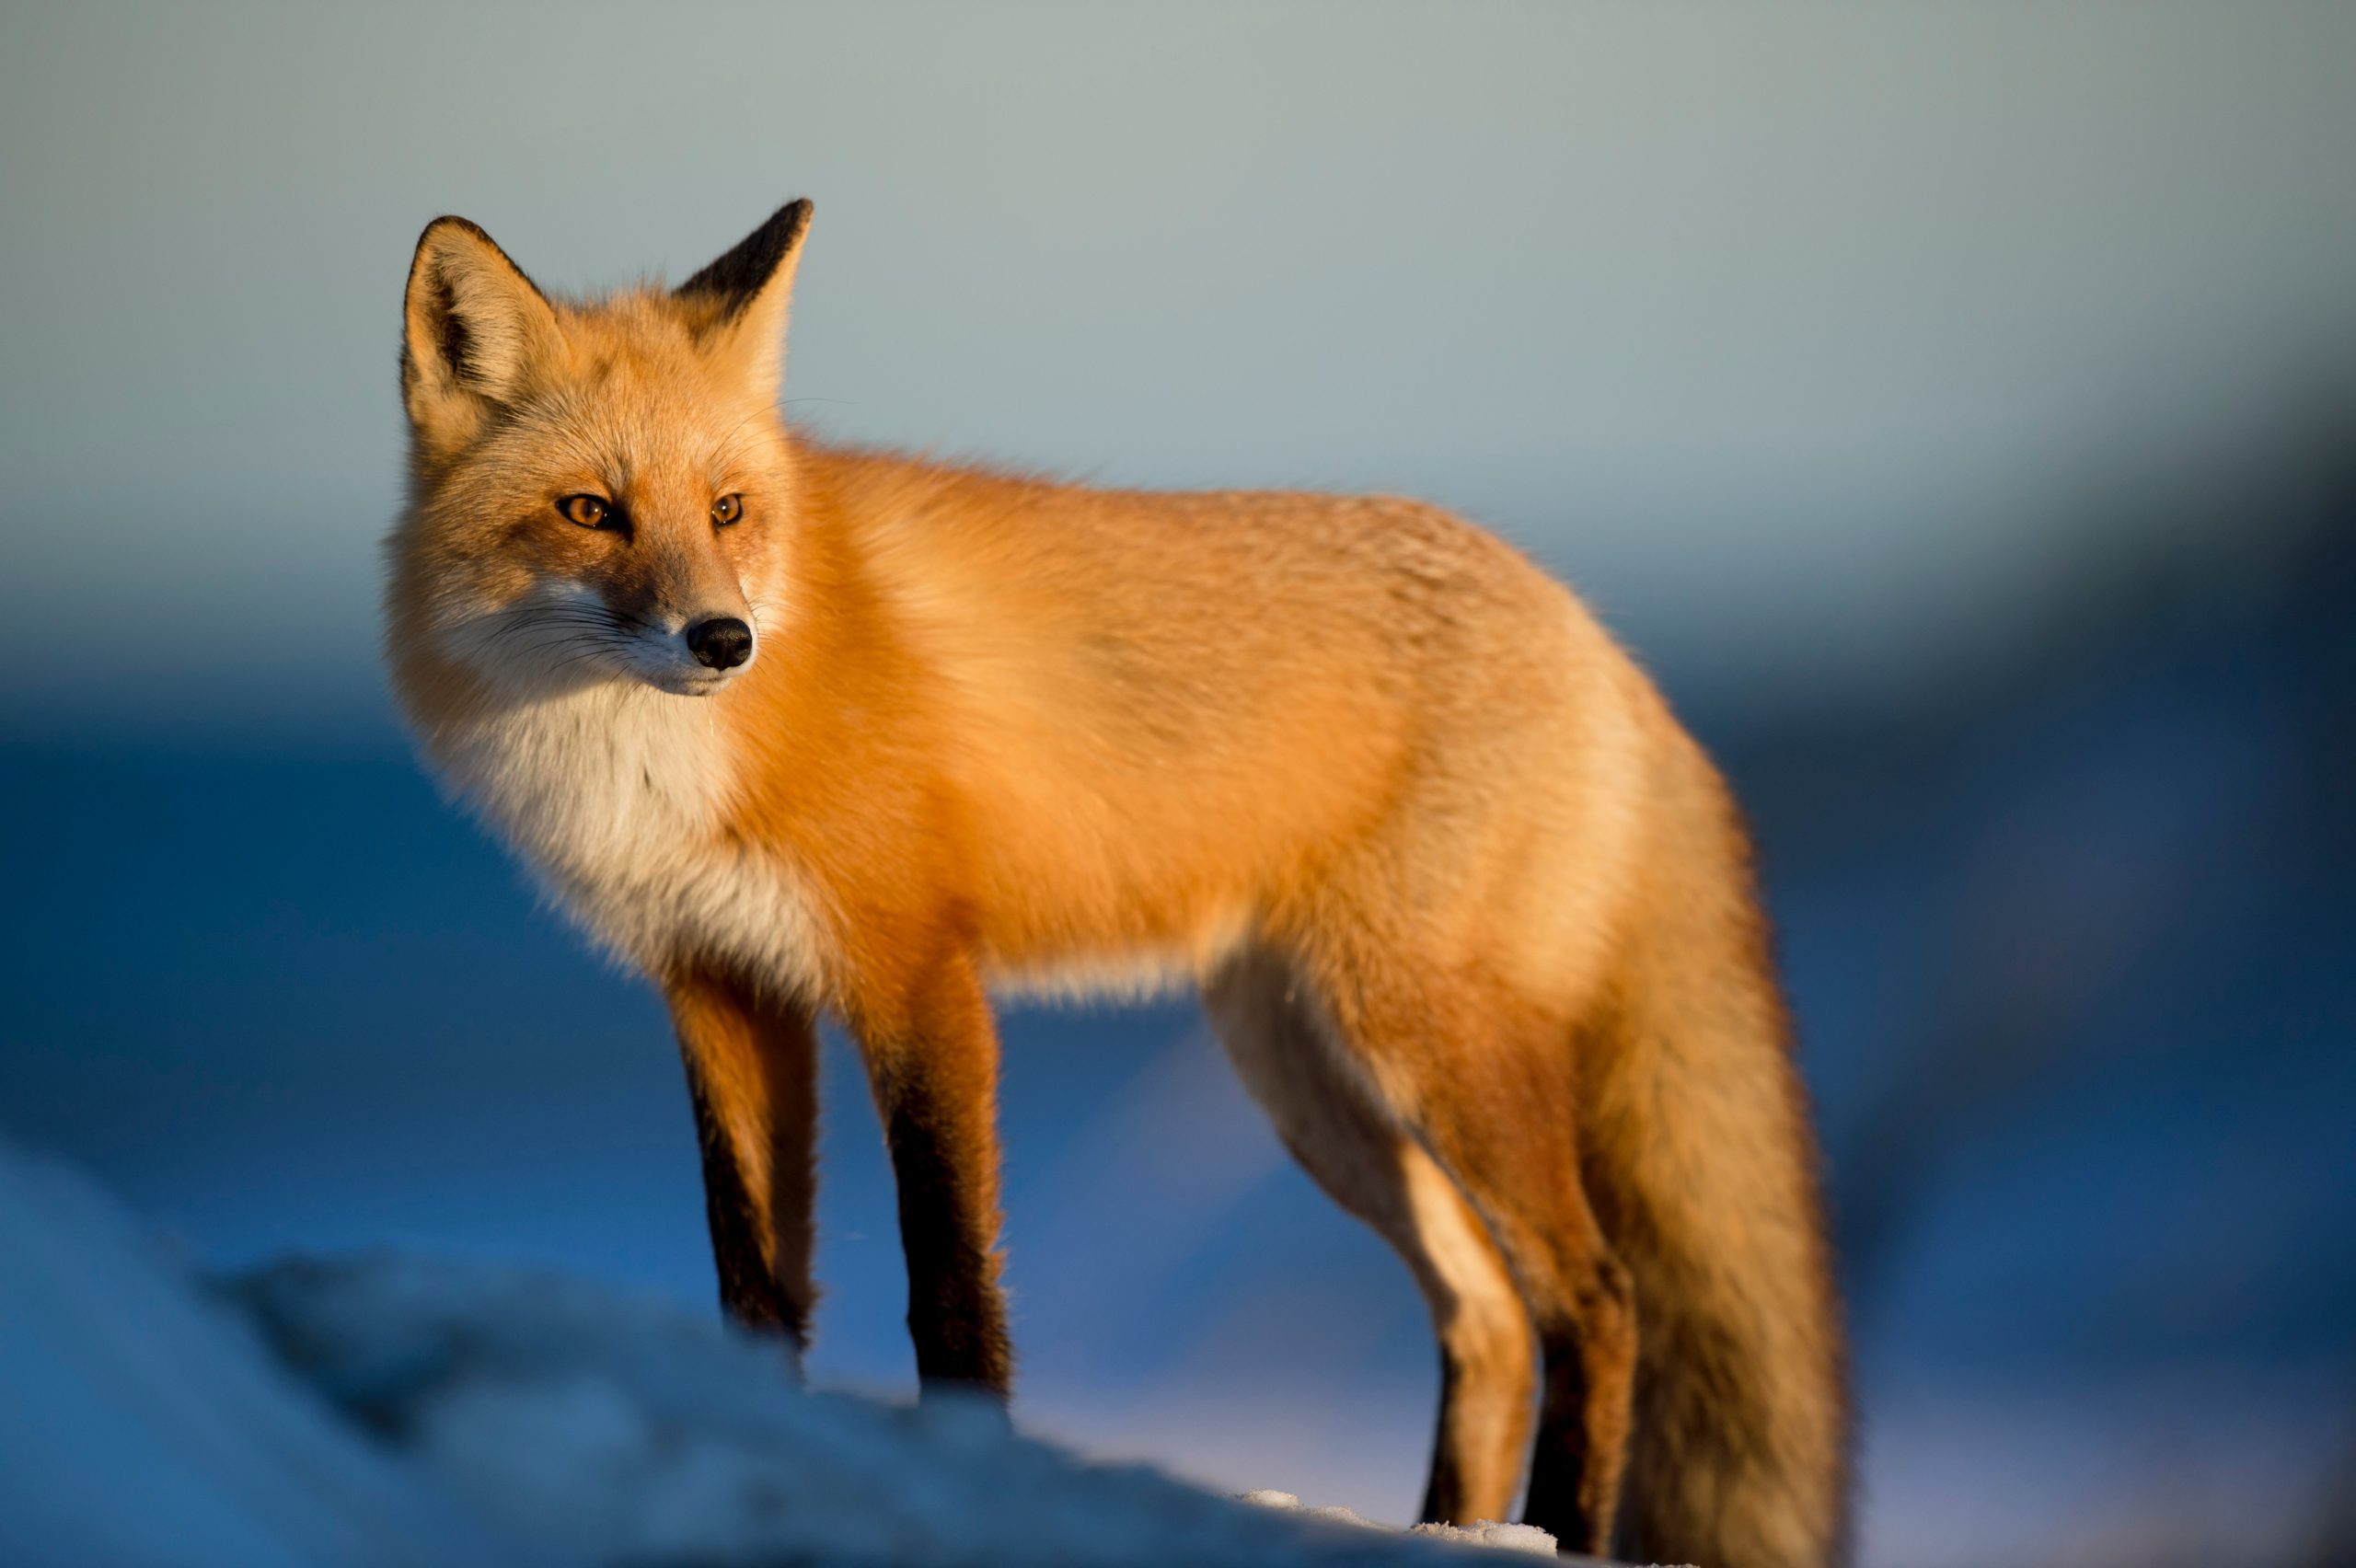 In an article about Fox Guest Posting, an orange fox stares out at the wilderness.